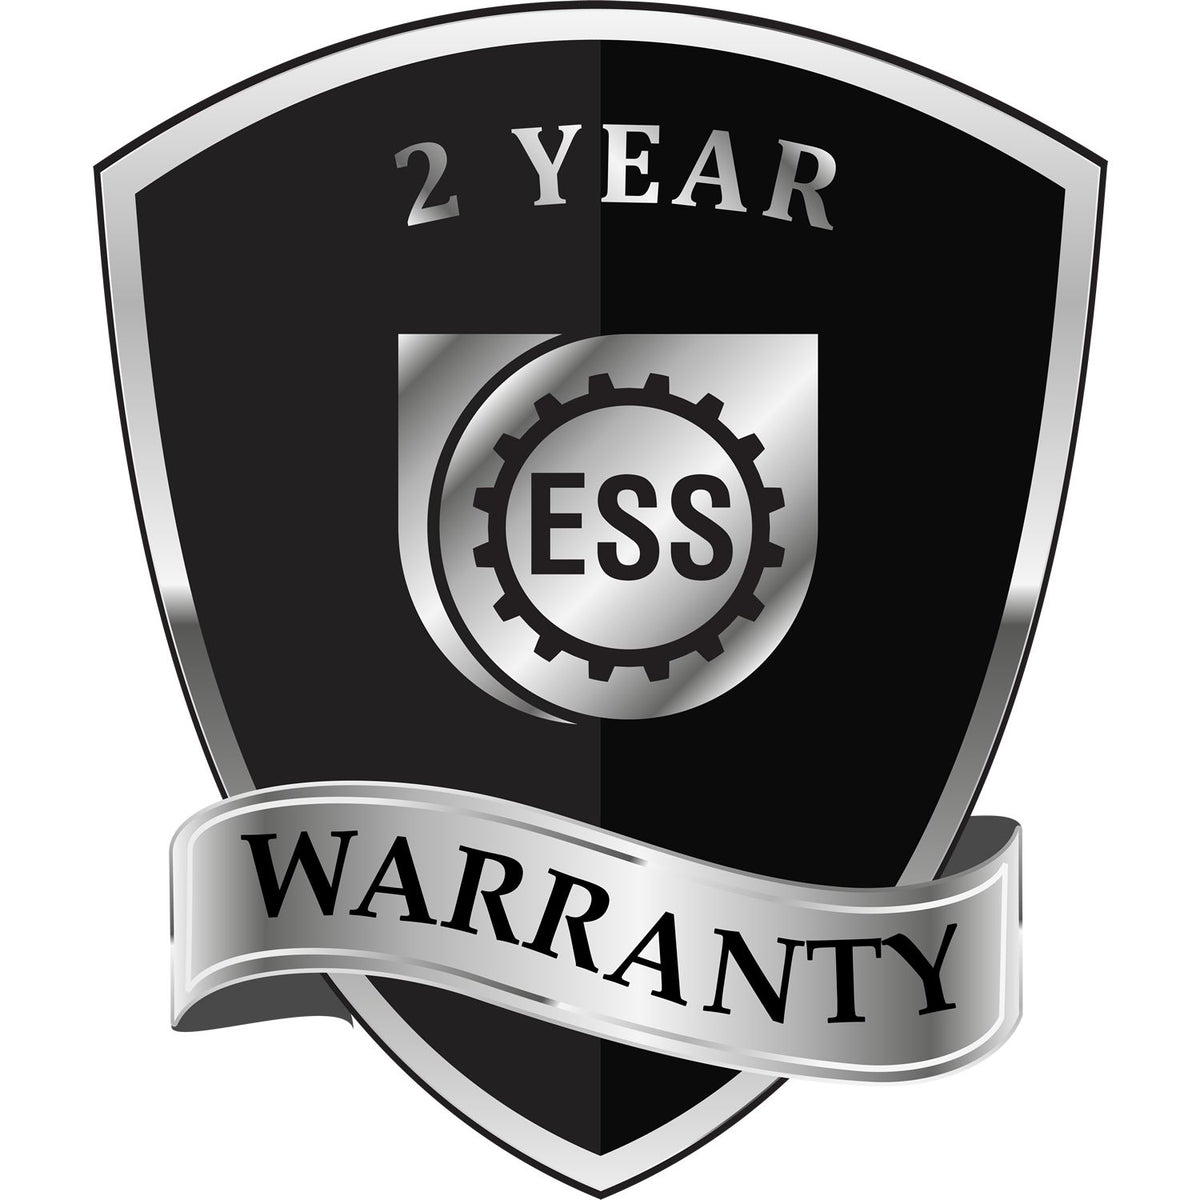 A badge or emblem showing a warranty icon for the Heavy Duty Cast Iron Kentucky Architect Embosser